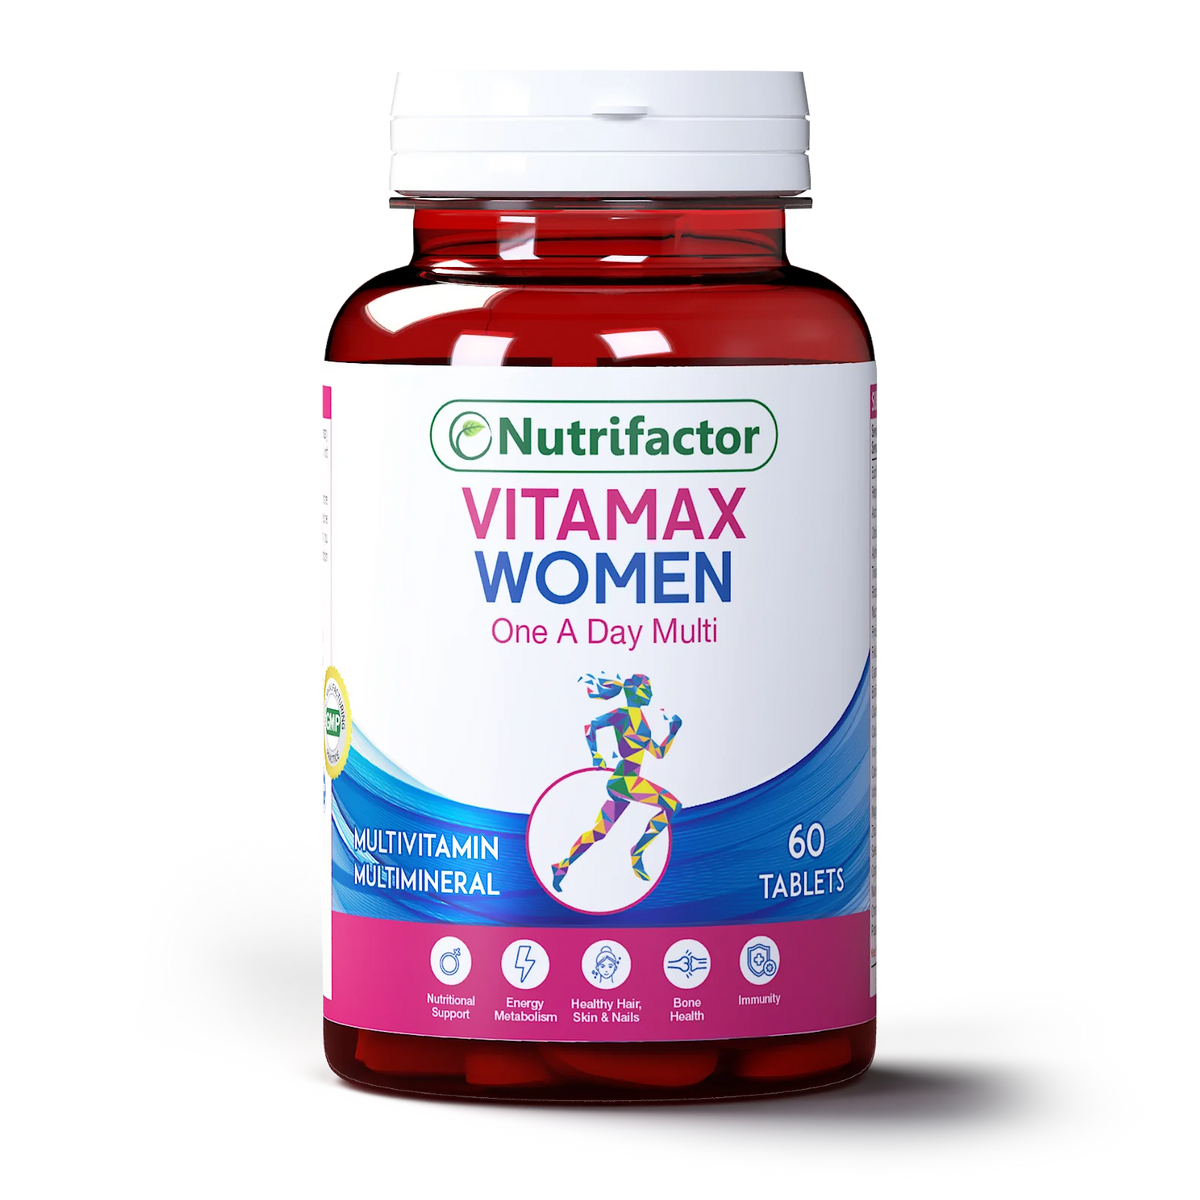 Nutrifactor Vitamax Women   Once A Day Multi Tablets 60s